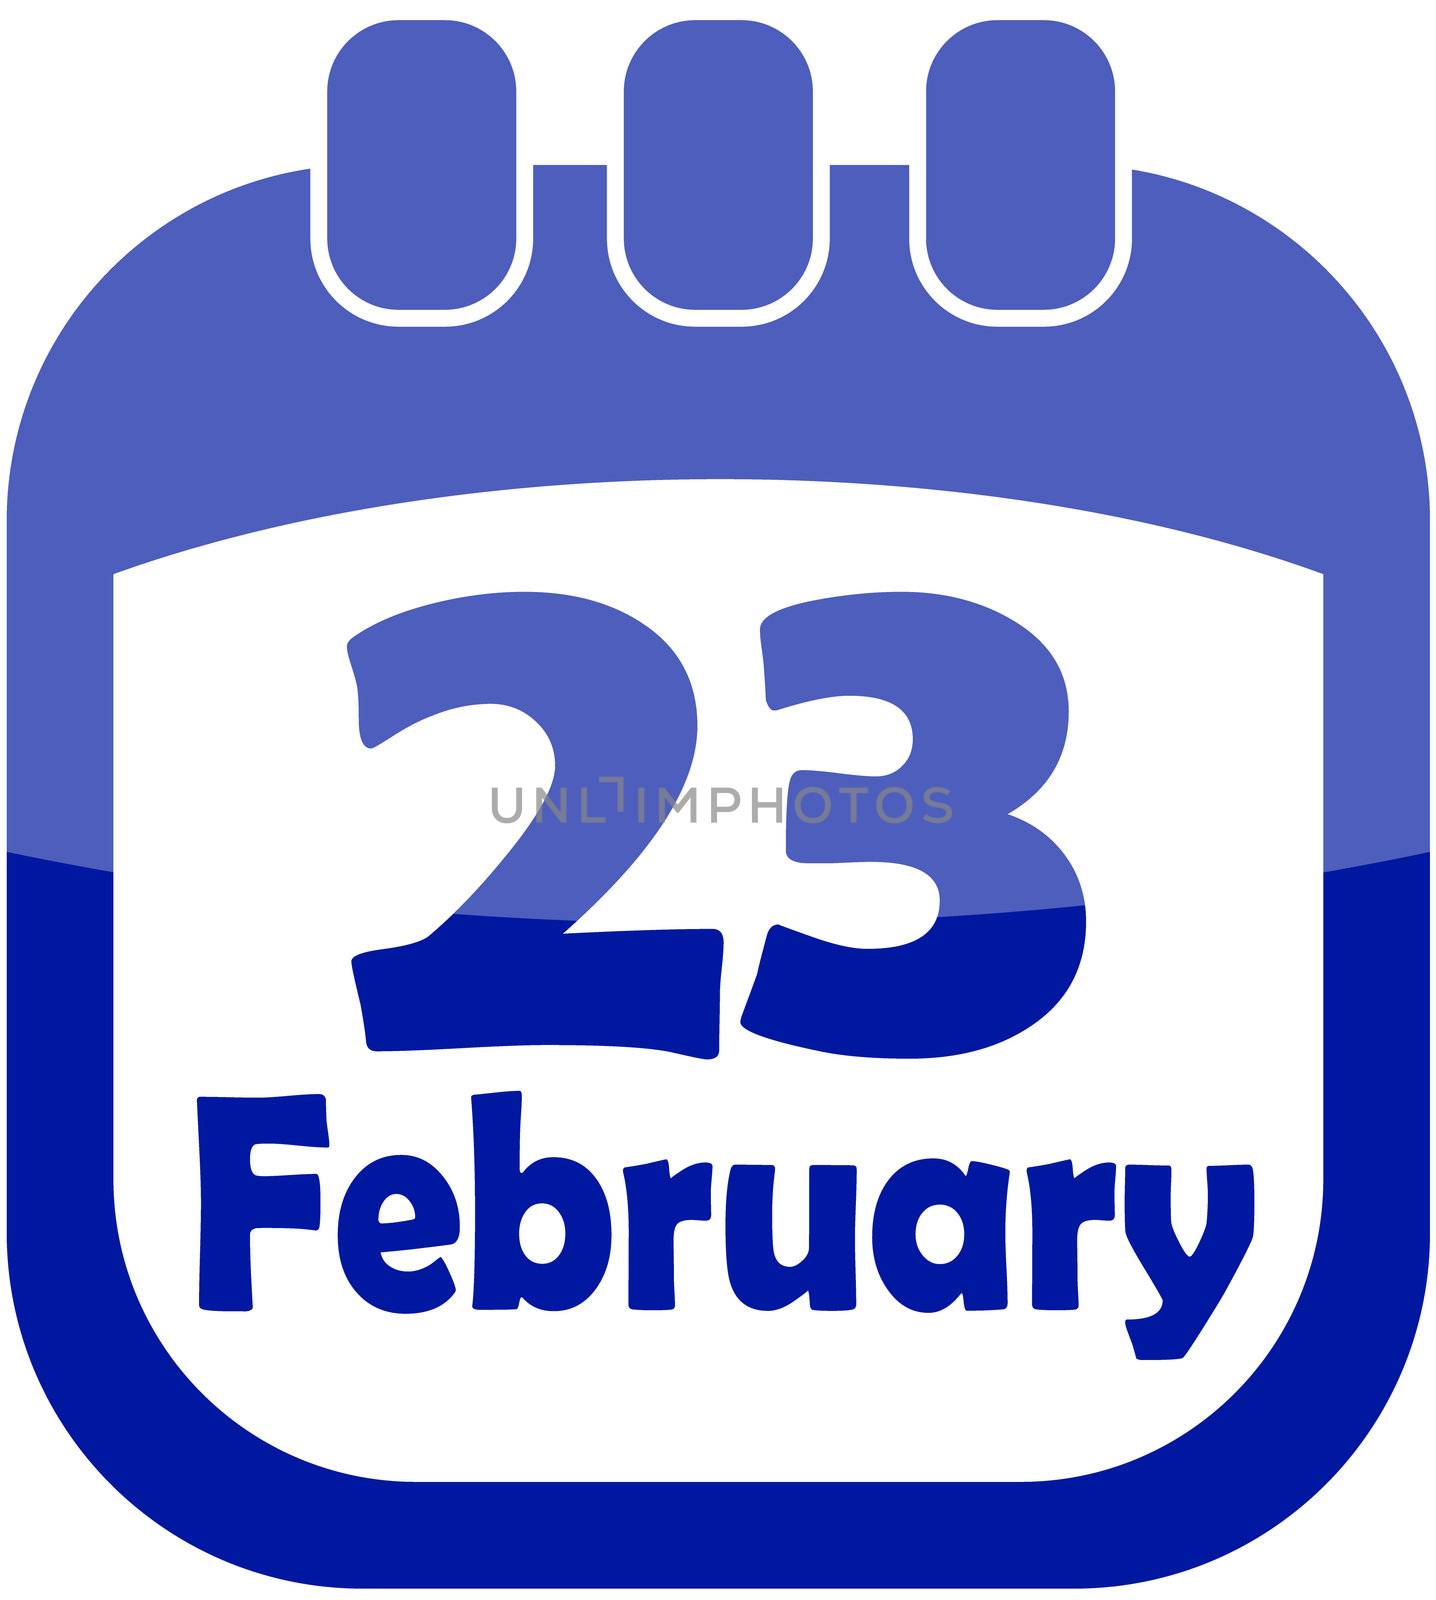 icon for February 23 in a calendar vector illustration